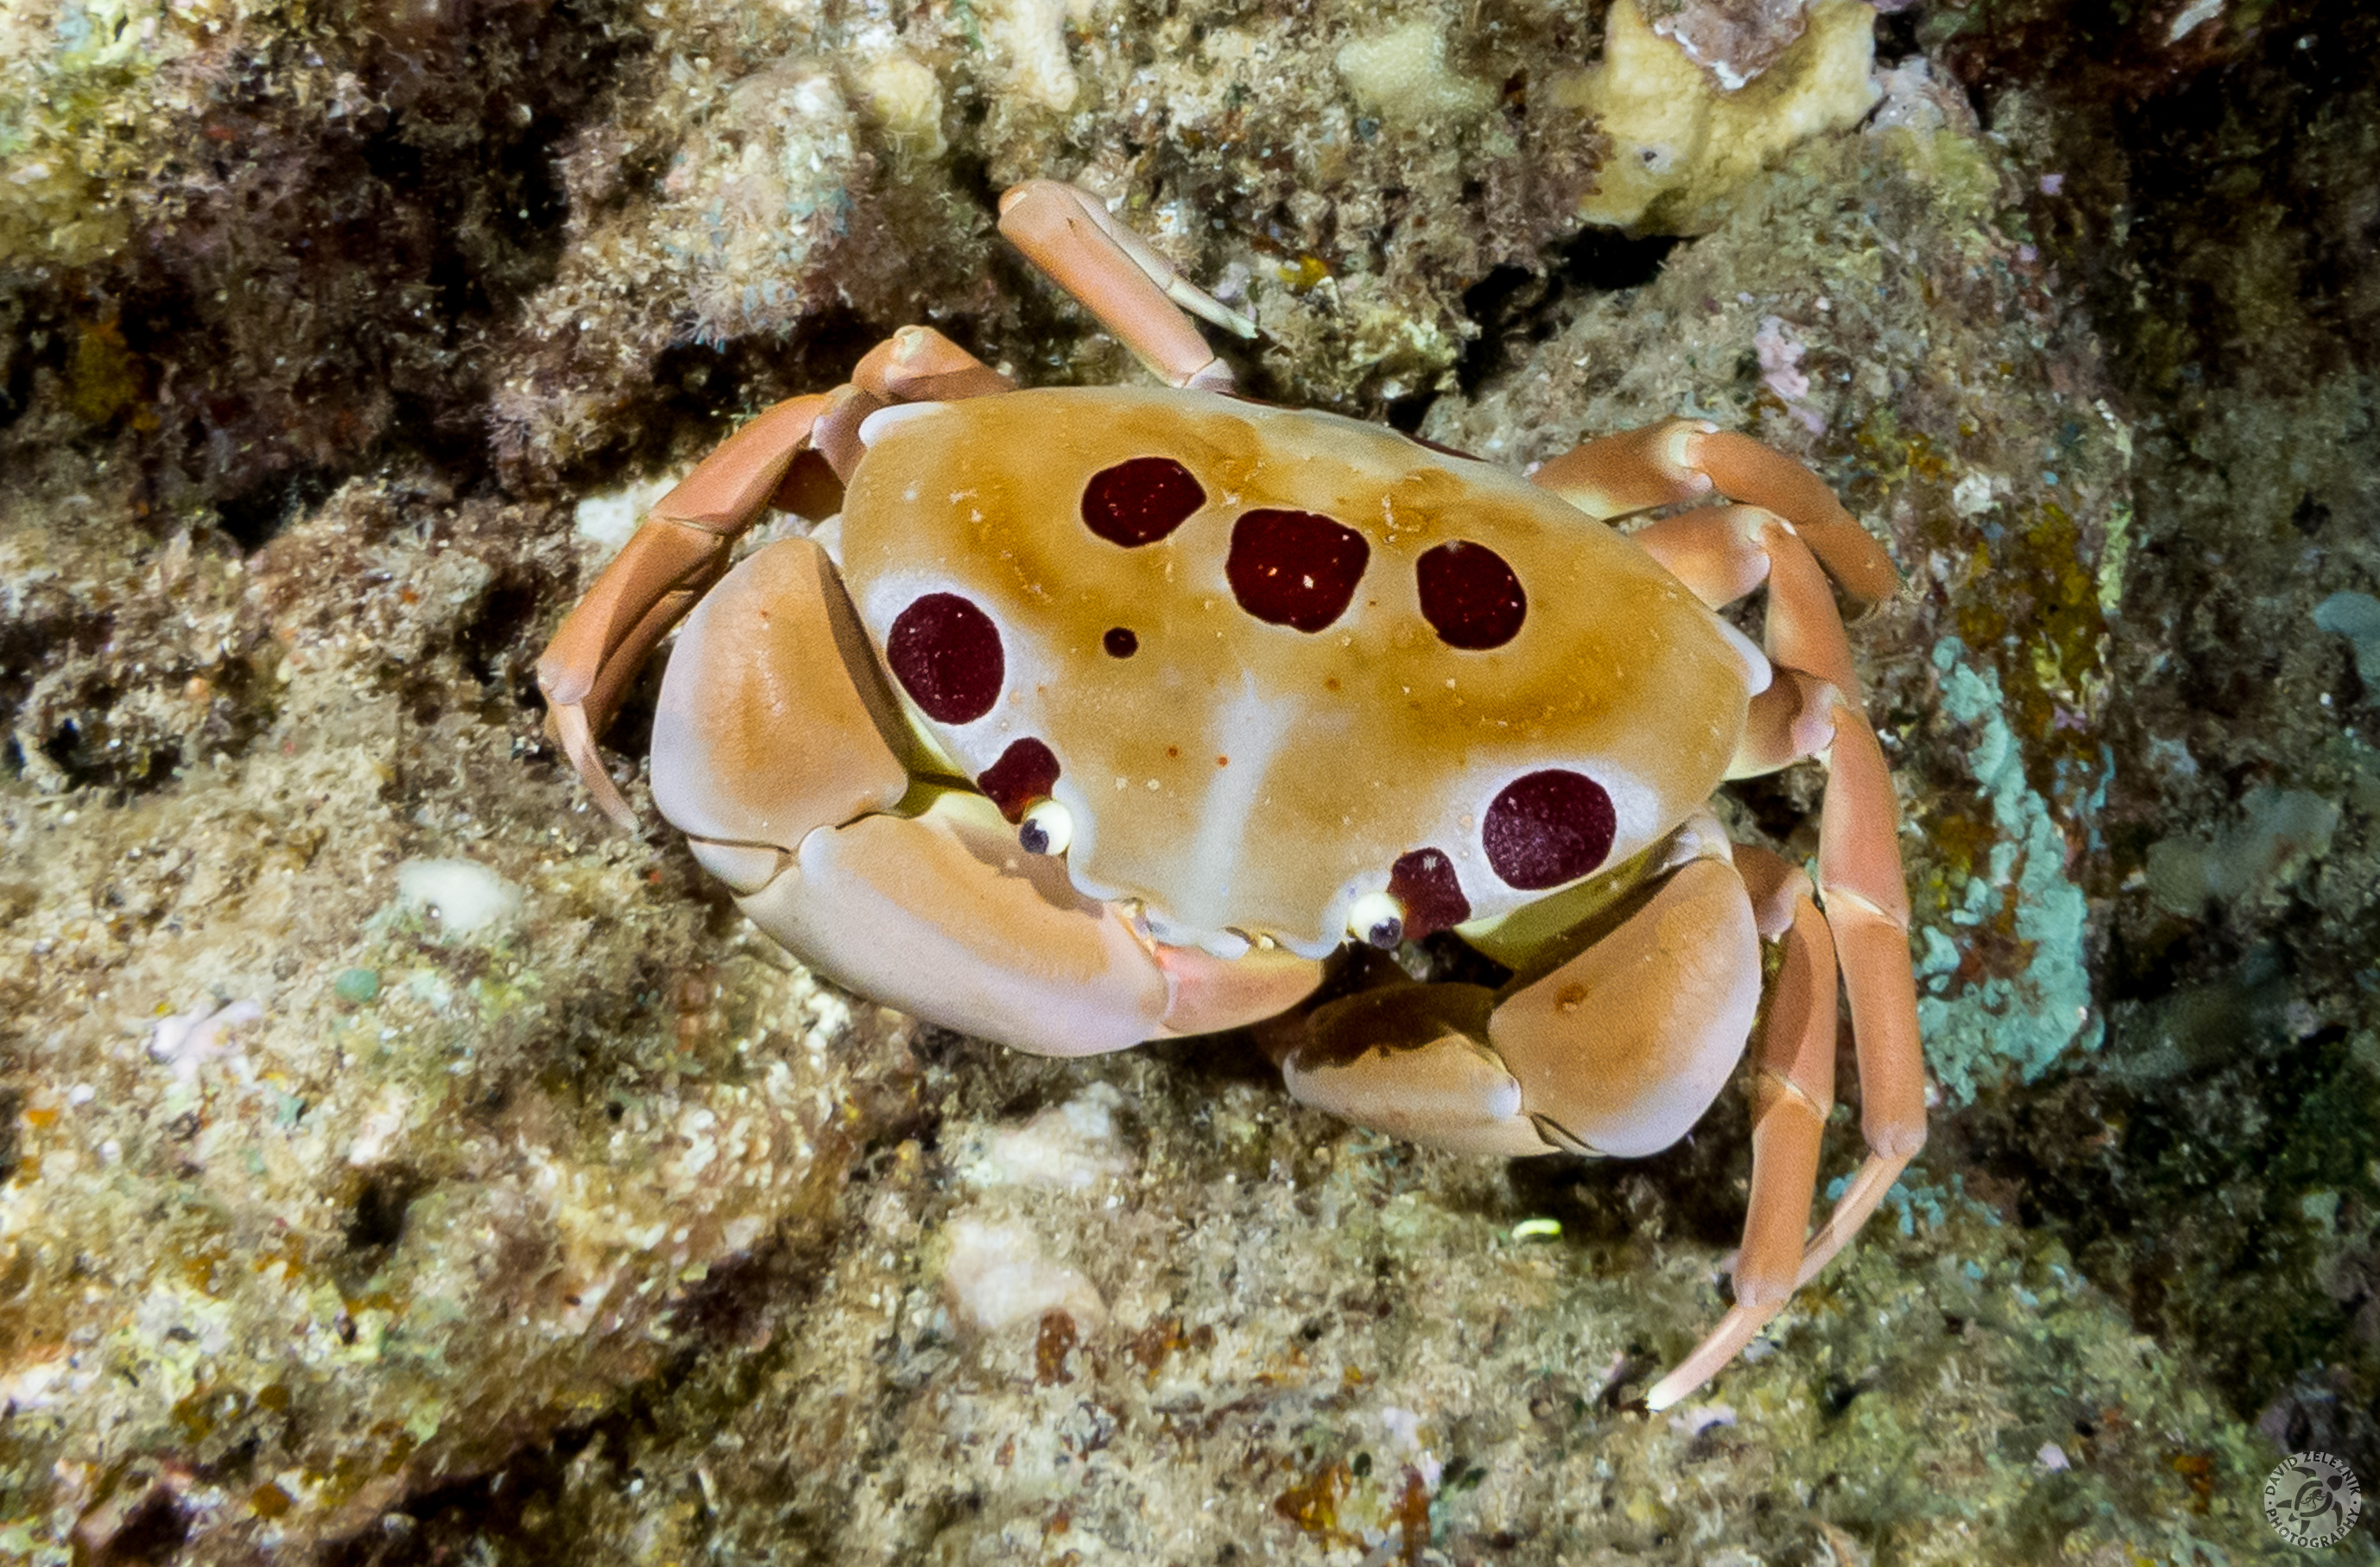 The so-called Seven-Eleven Crab, or Alakuma in Hawaiian. It is named due to the seven conspicuous red spots (four near the eyes and three in the center), plus four less prominent red spots along the back edges of its carapace, making a total of eleven. This one was approximately 6" across.